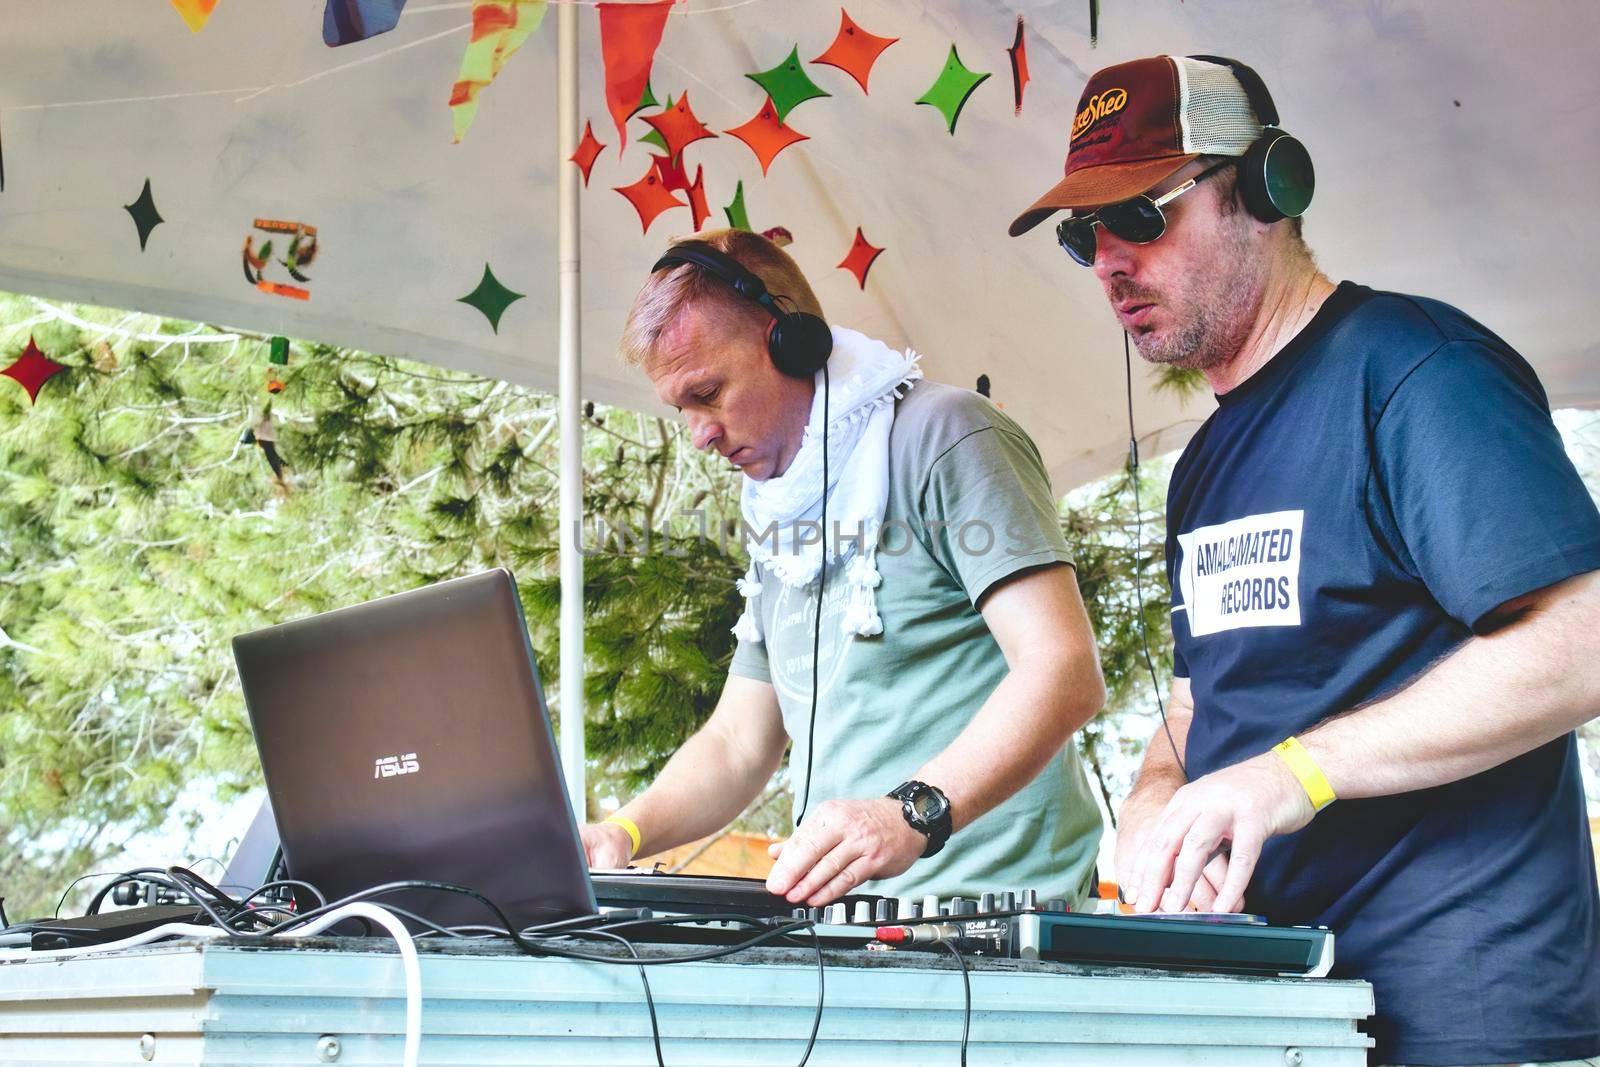 TaQali, Malta - Sept 23 2017: A couple of male DJs playing music under a tent at a summer festival